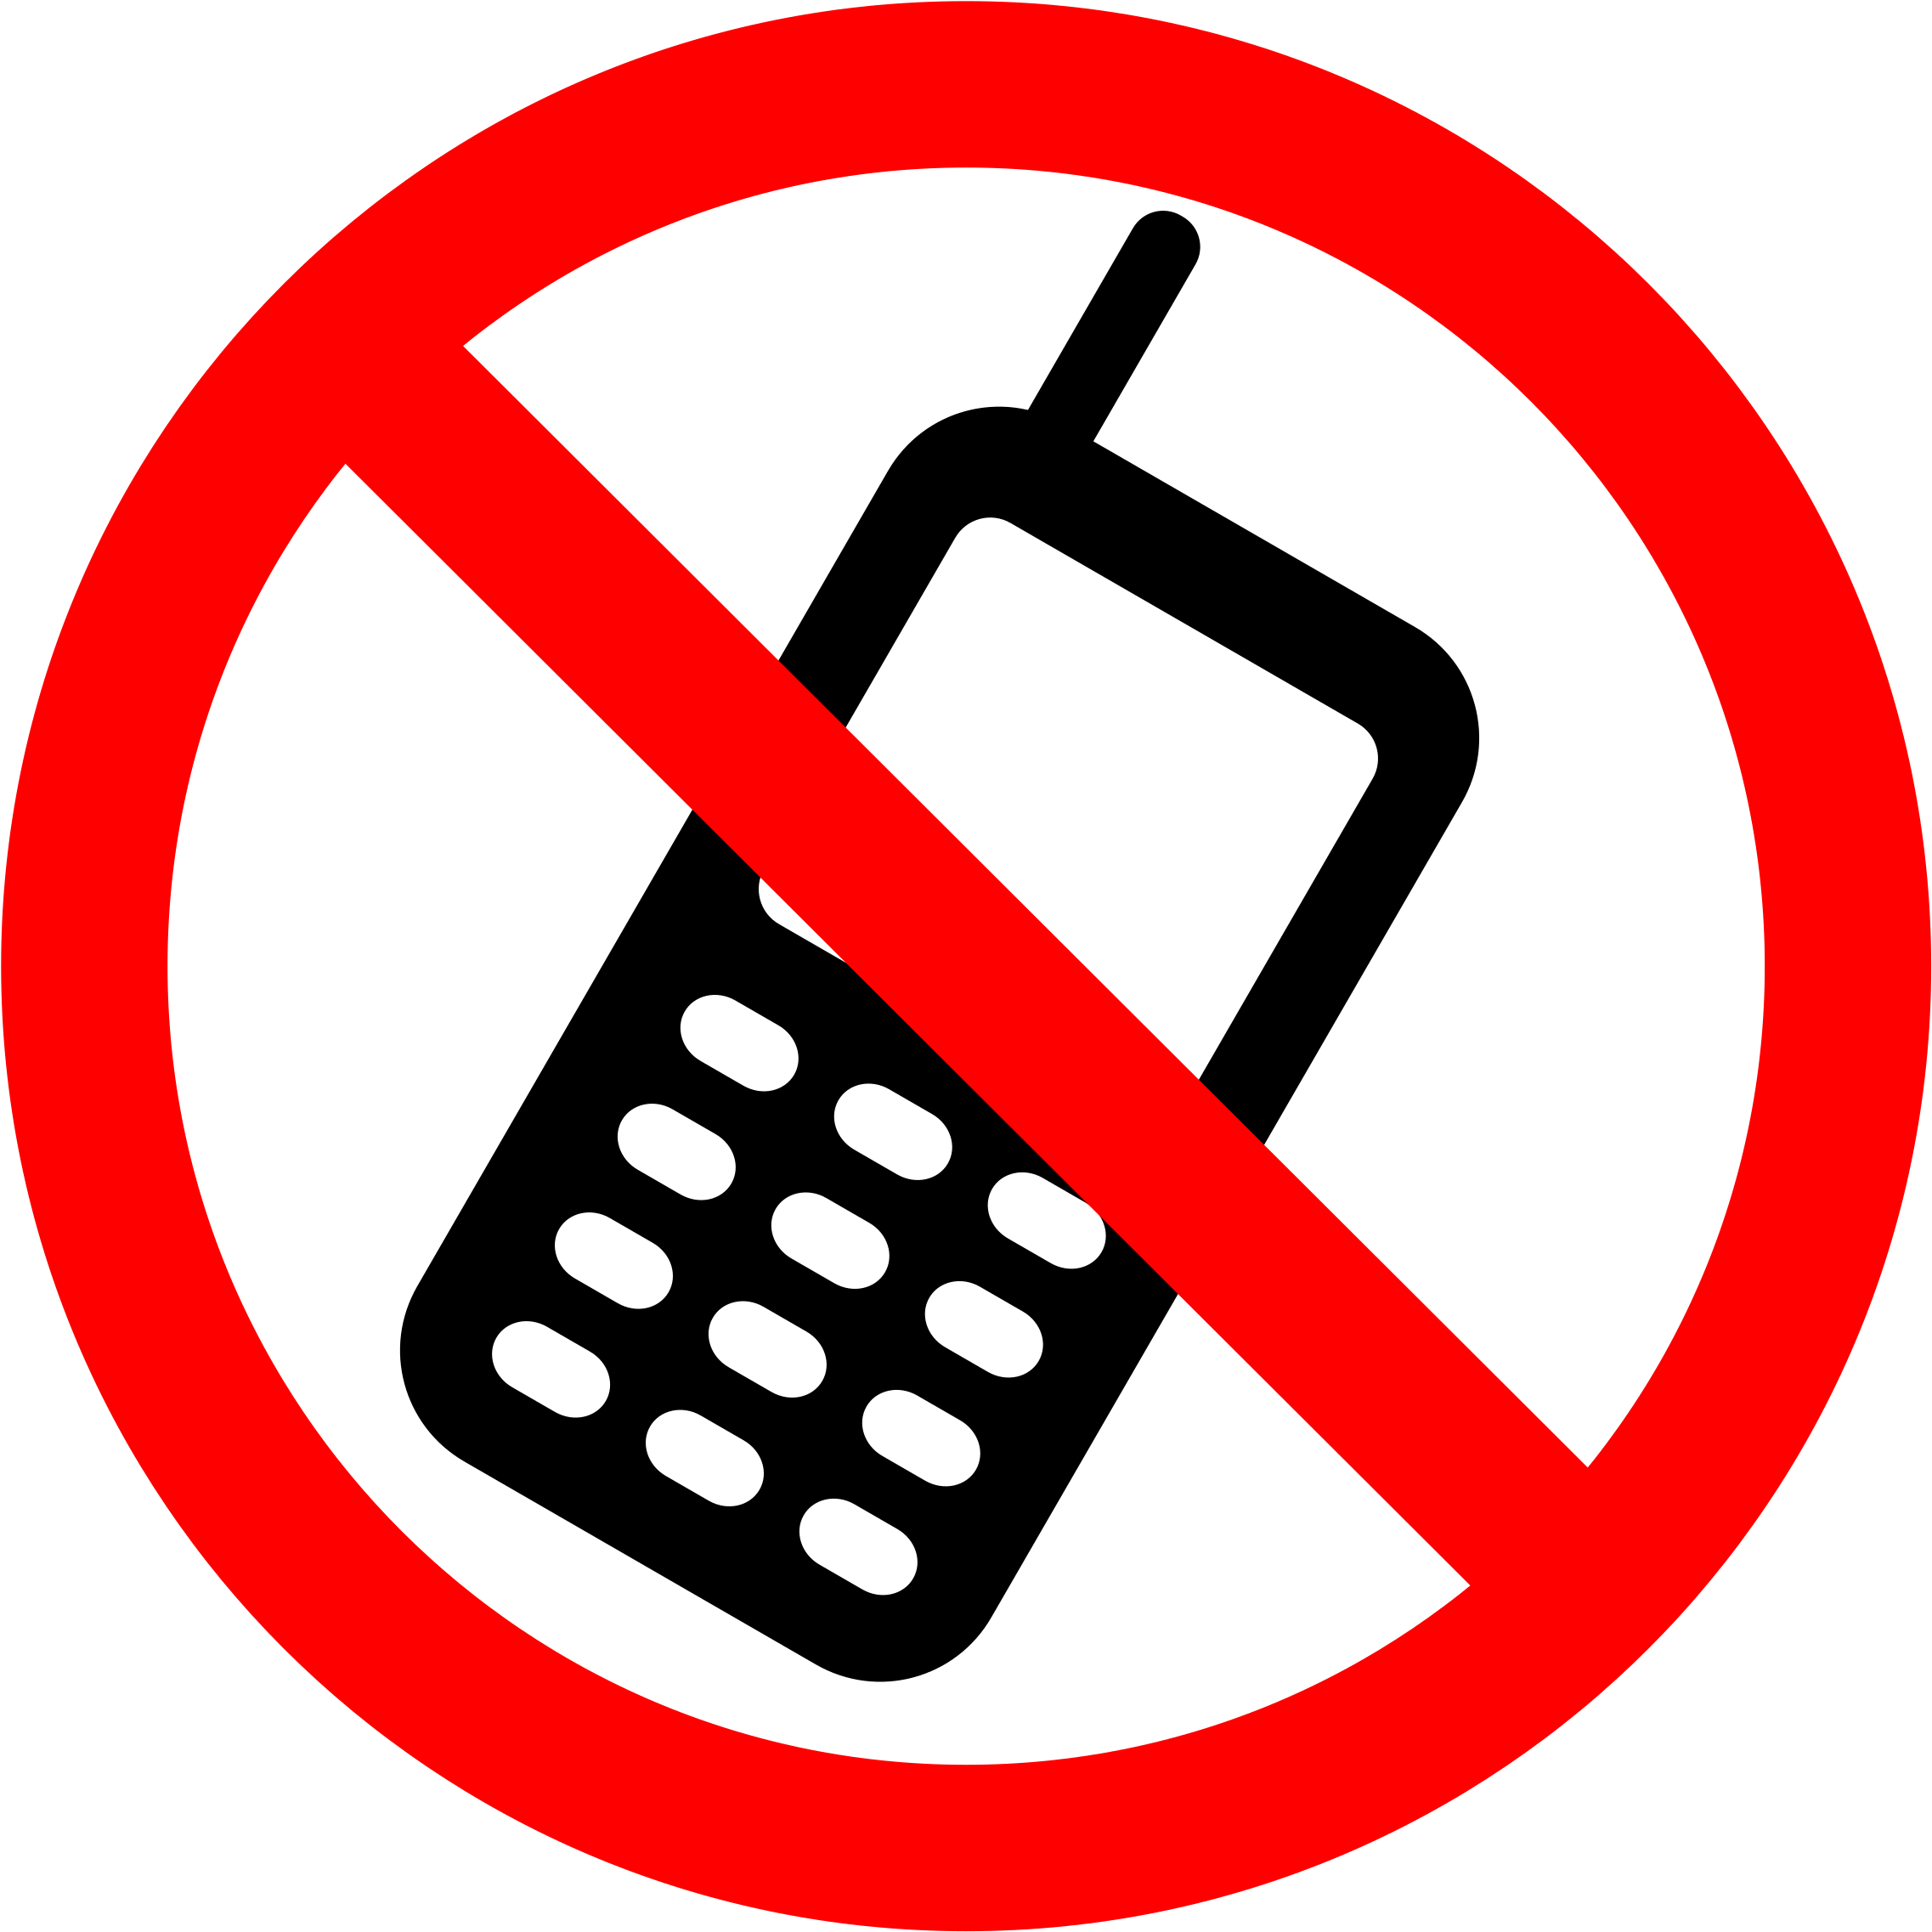 No Cell Phones Allowed - No Mobile Phone Sign Uk (2400x2400)